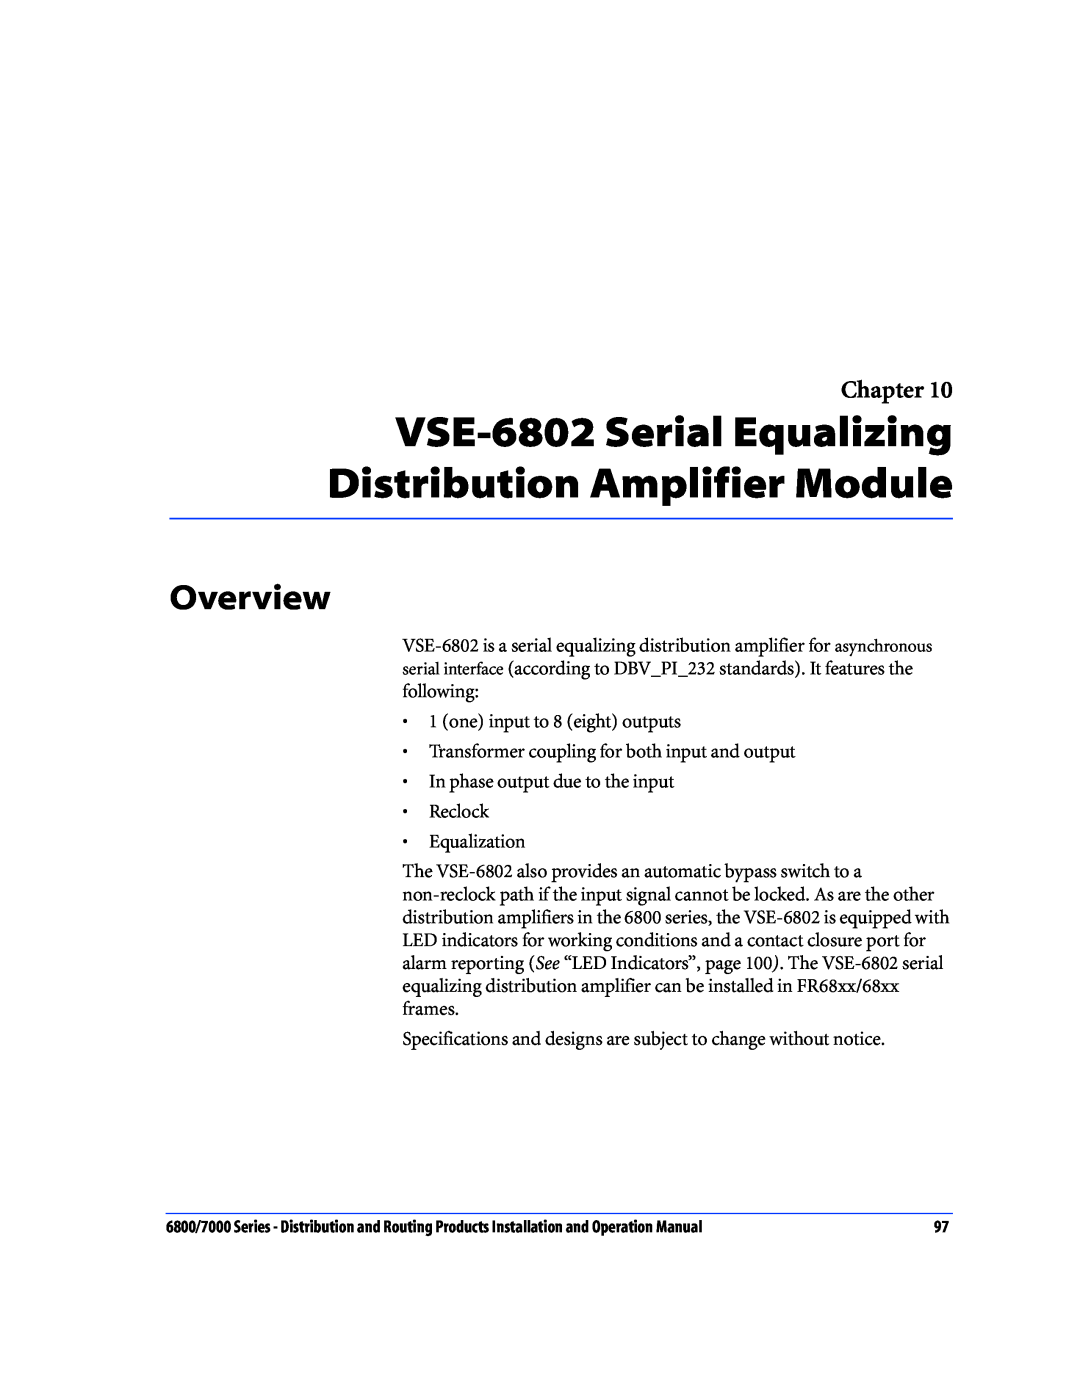 Nokia 6800 Series, 7000 Series operation manual VSE-6802 Serial Equalizing Distribution Amplifier Module, Overview, Chapter 